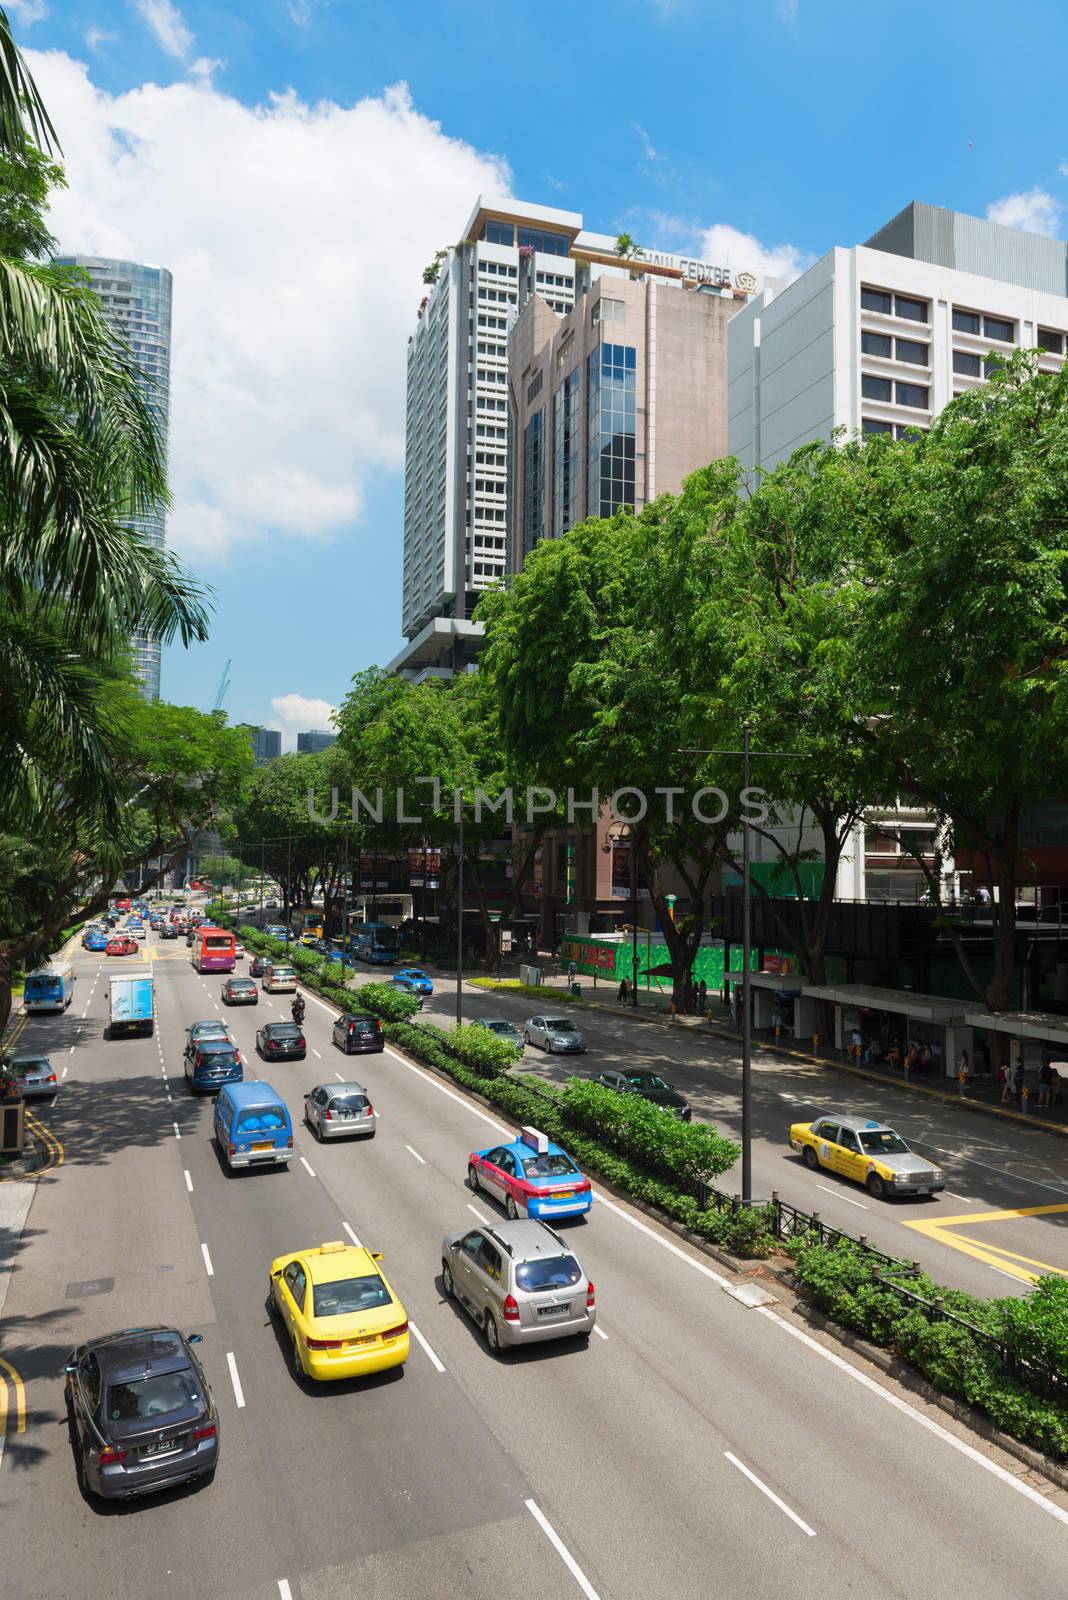 SINGAPORE - JUN 1: Cars drive along famous Orchard road on Jun 1, 2013 in Singapore. This 2.2 kilometer street is the retail hub of the city. It is a major tourist attraction as shopping street.